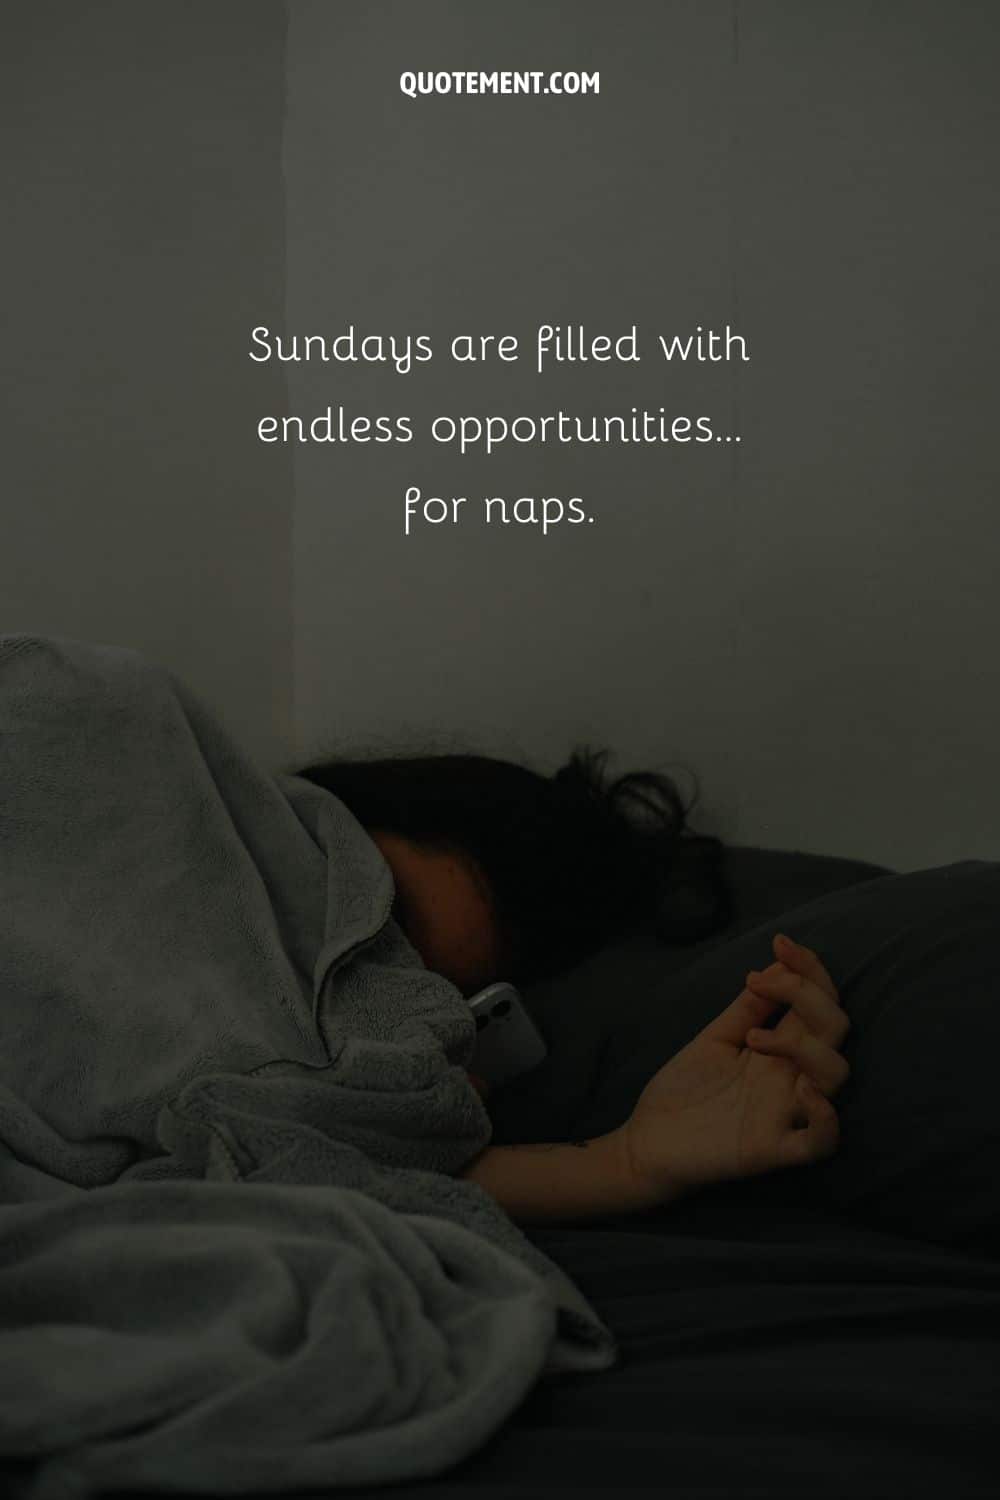 “Sundays are filled with endless opportunities… for naps.”